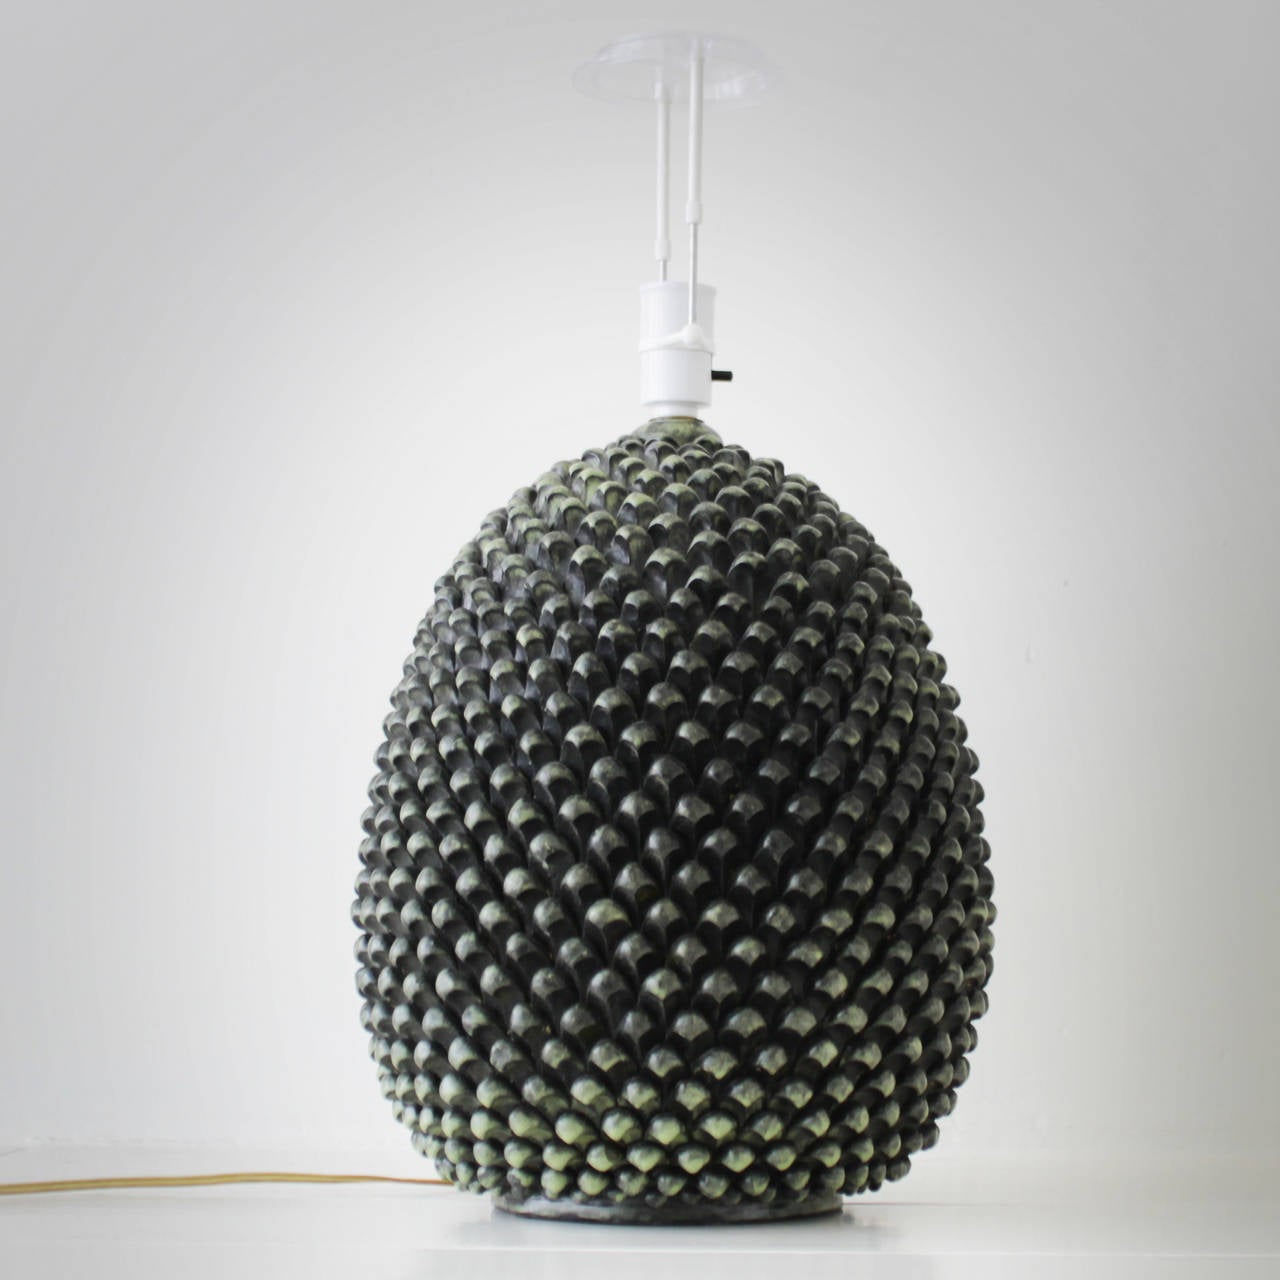 Pine cone table lamp by Marcello Fantoni for Fantoni Studio Firenze, Italy.
Ceramic lamp in deep green glaze colors. Signed.
Diameter: 11.8 inches (30 cm), height including the socket 18.9 in. (48 cm).
We offer this lamp without the shade.